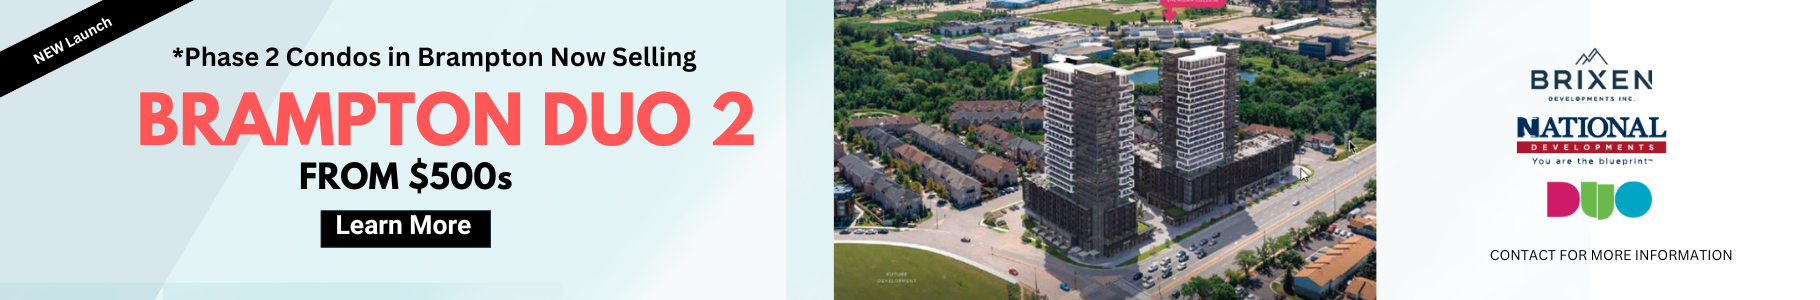 Brampton Duo Condos is a Brand New Pre-construction Development by National Homes and Brixen Developments Inc., Located at 245 Steeles Ave W, Brampton, Ontario.